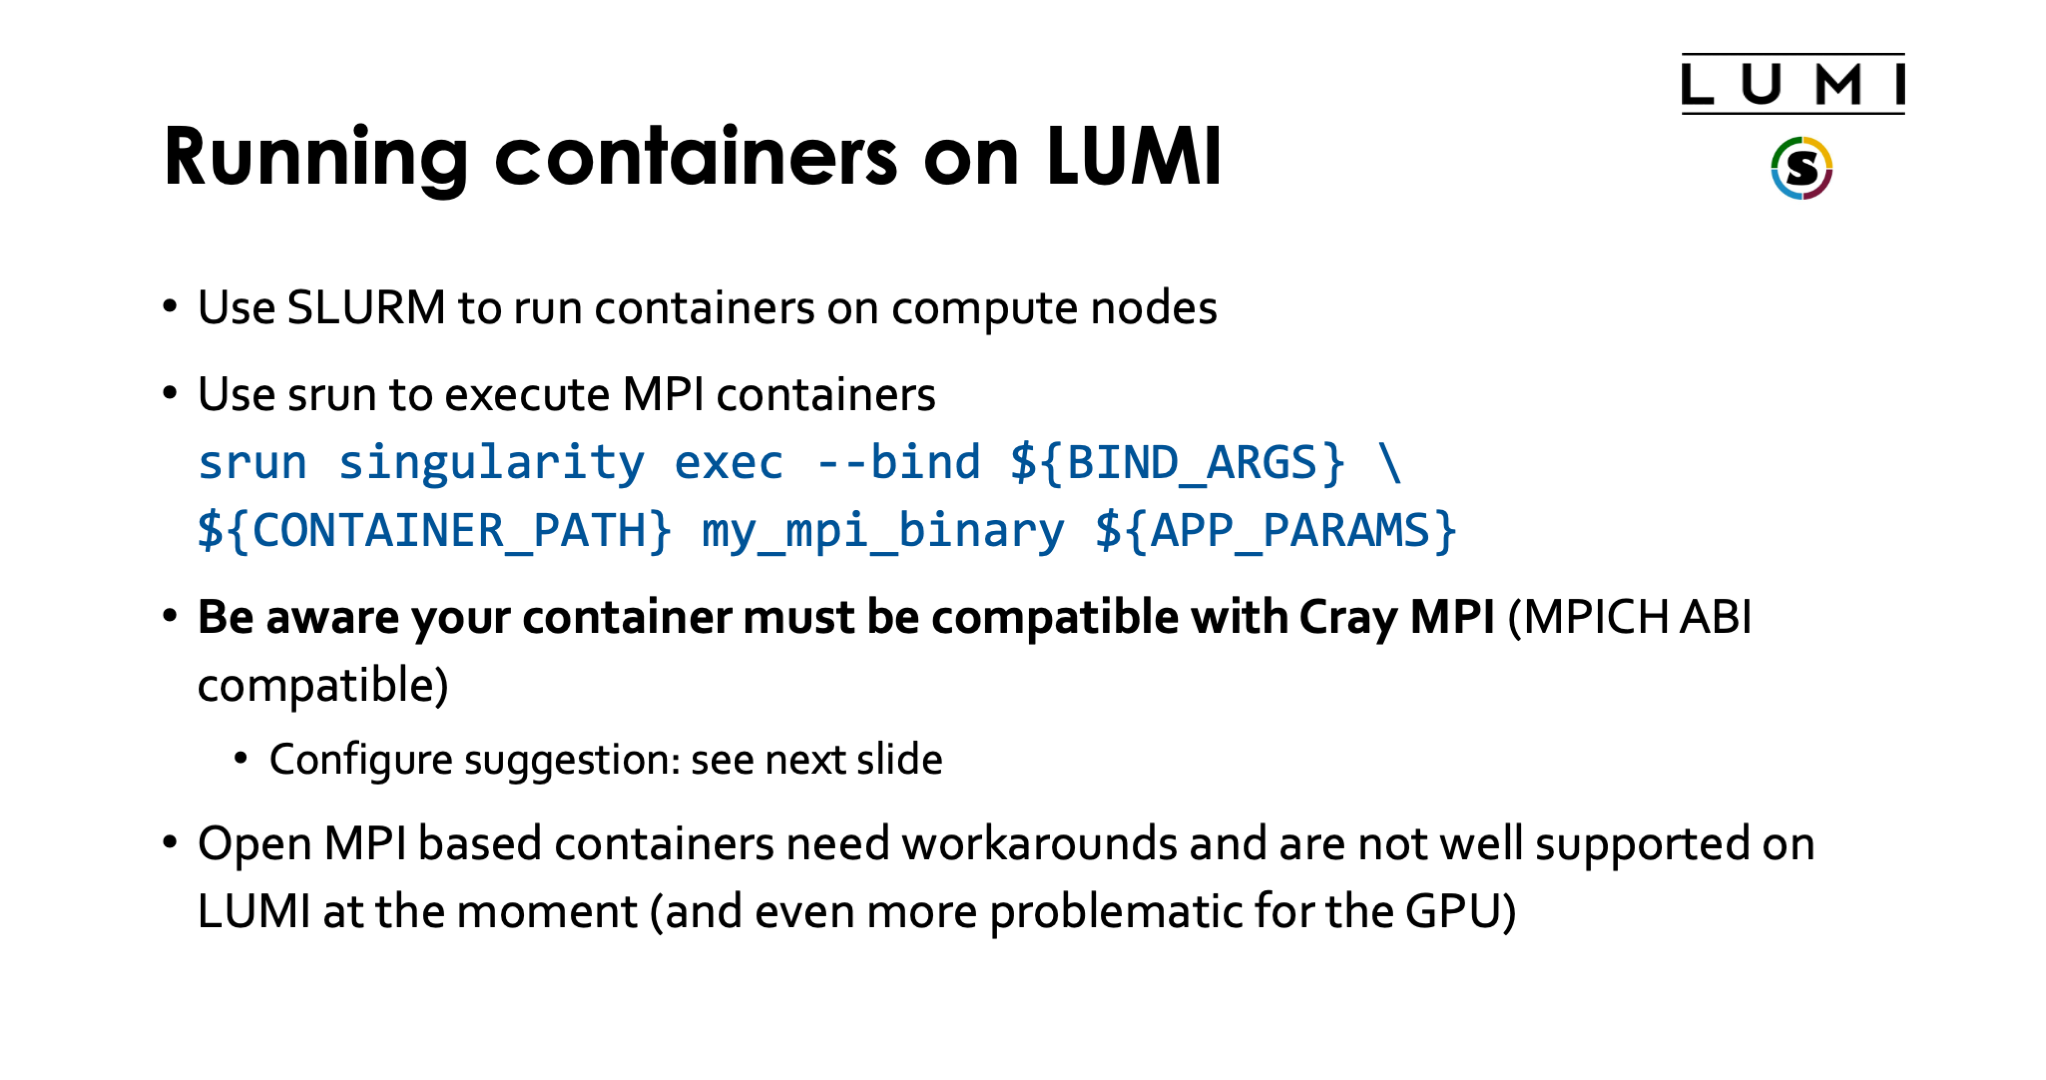 /running containers on LUMI